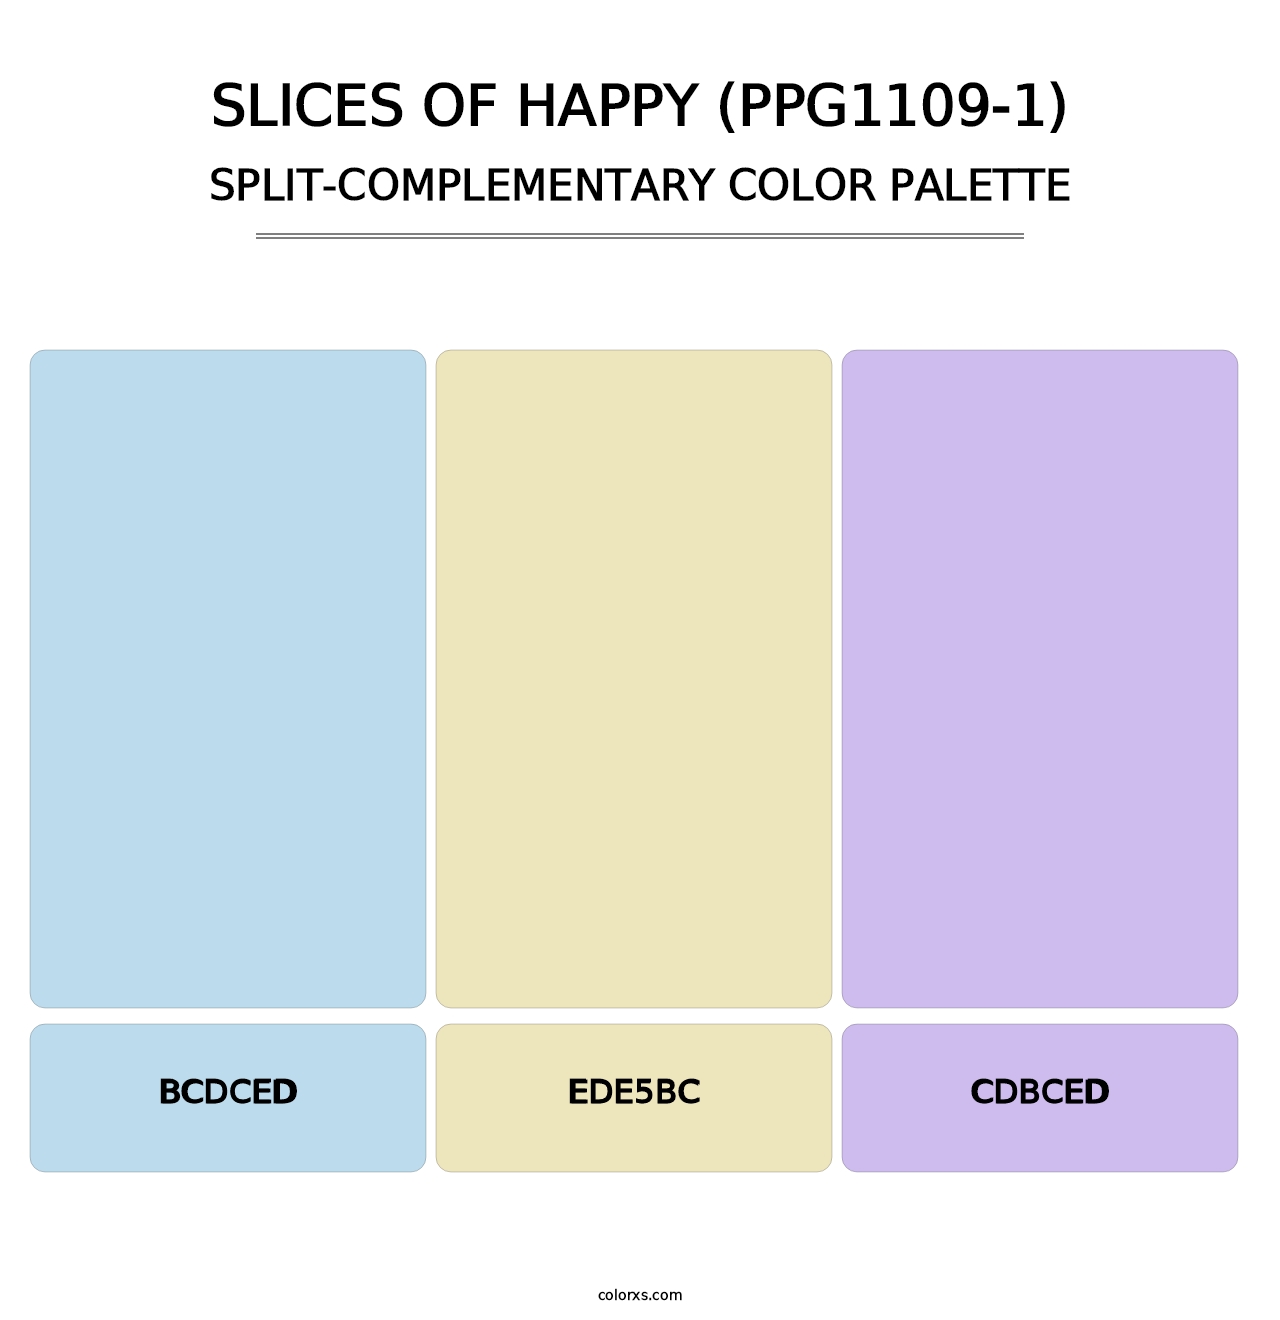 Slices Of Happy (PPG1109-1) - Split-Complementary Color Palette